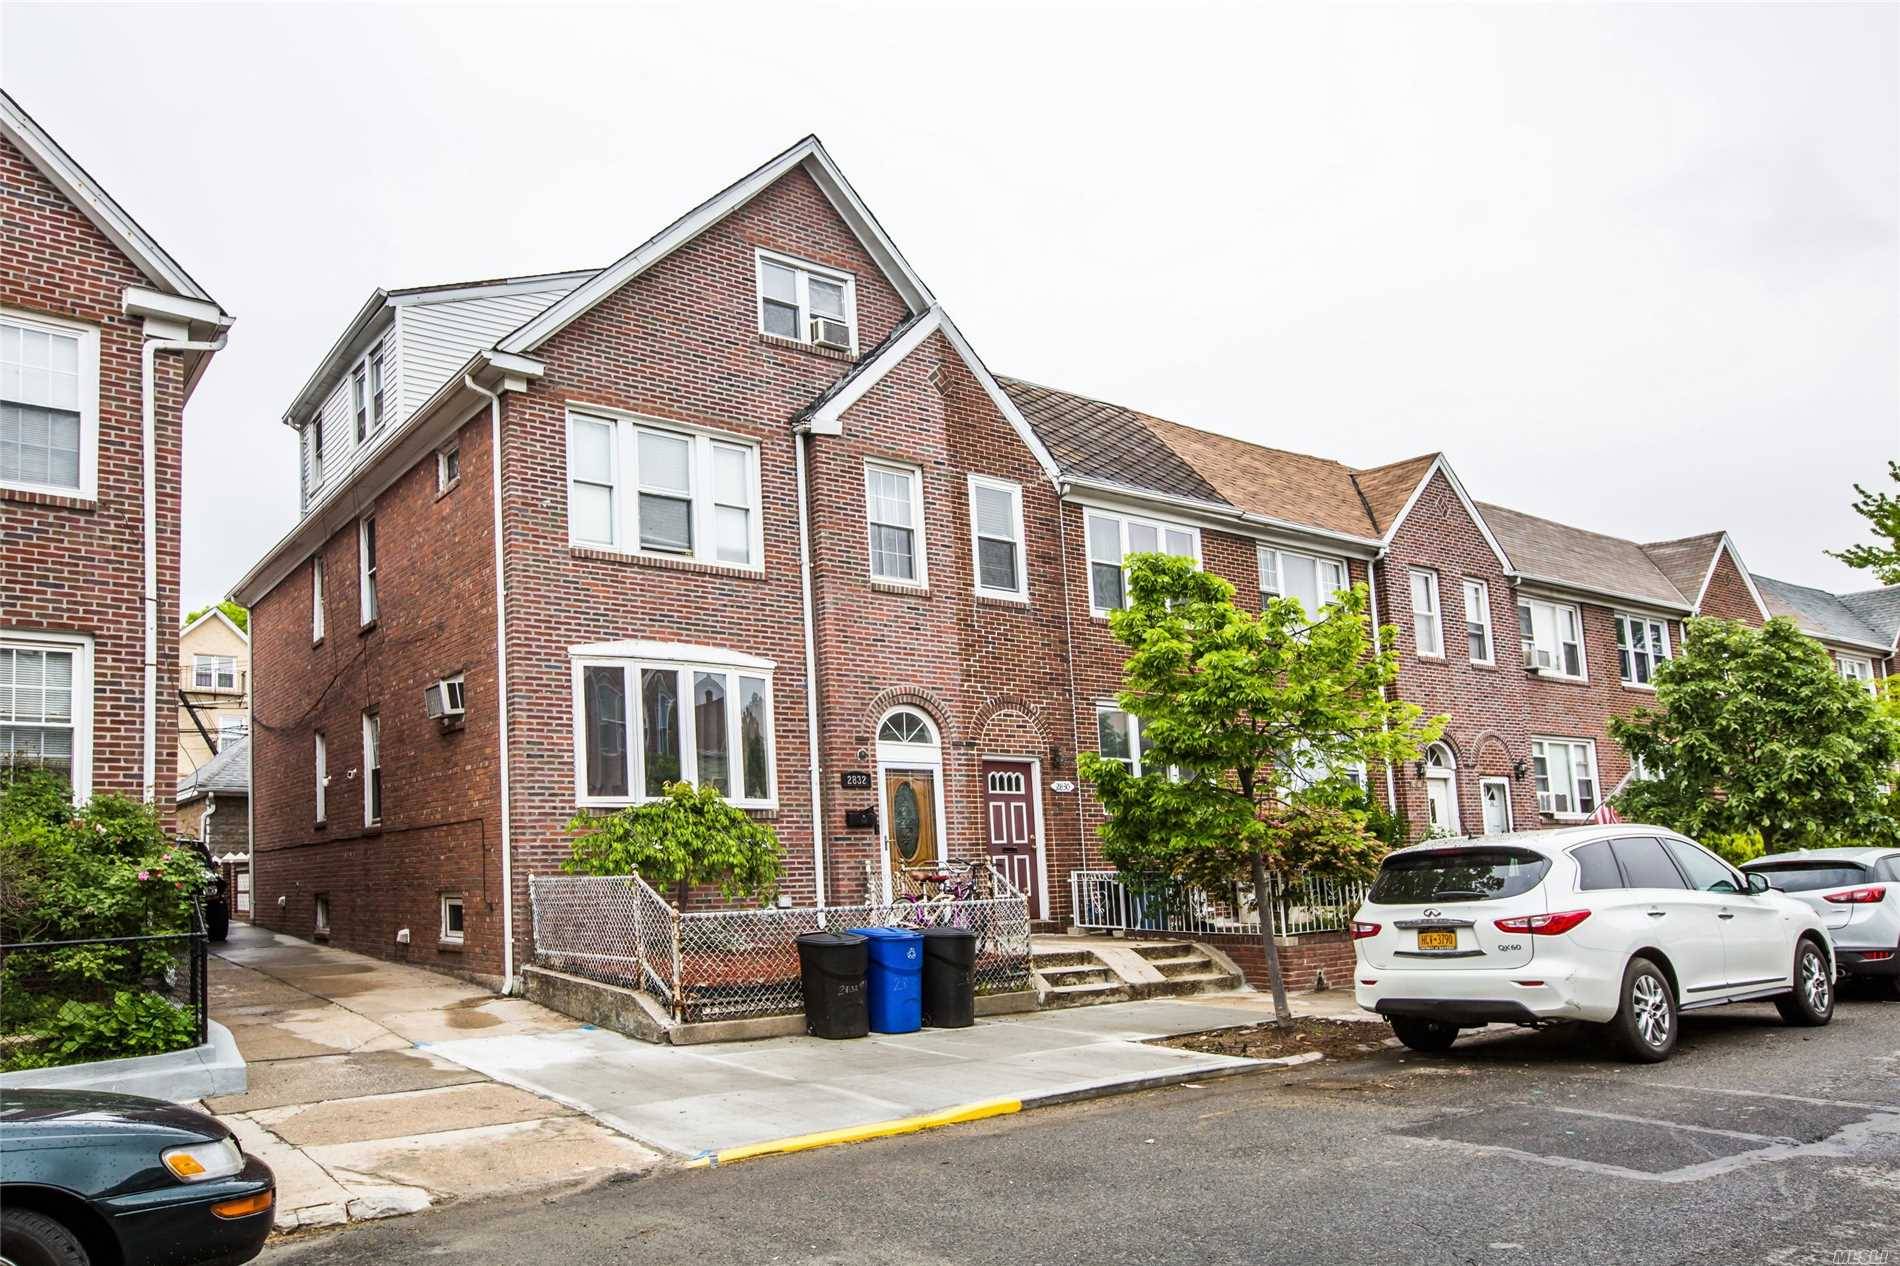 Rare Opportunity Legal 2 Family House In Astoria/Lic, R5 Zoning, 2 Car Detached Garage.